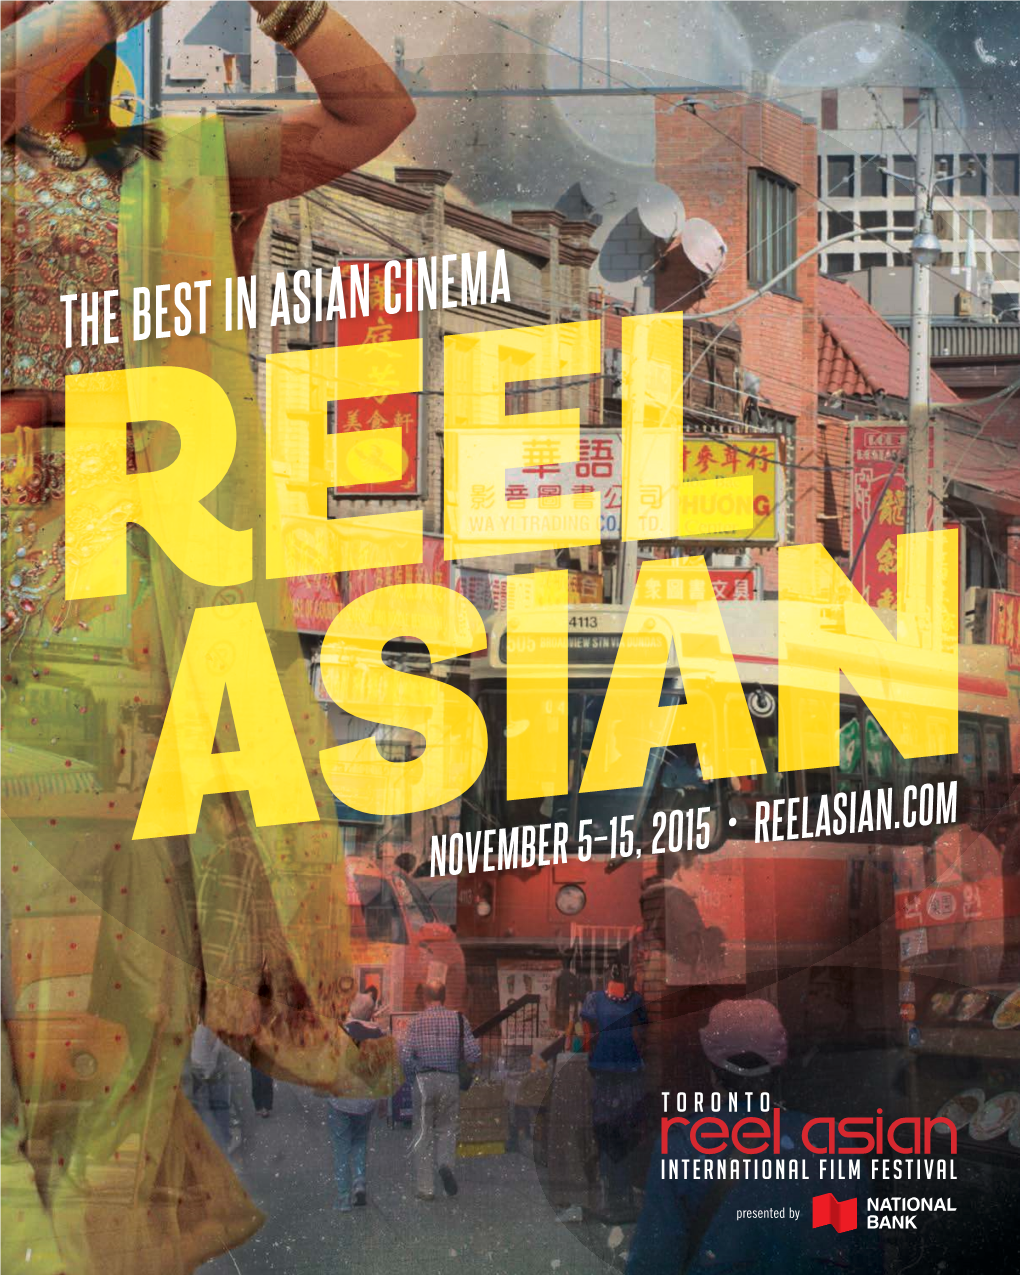 The Best in Asian Cinema